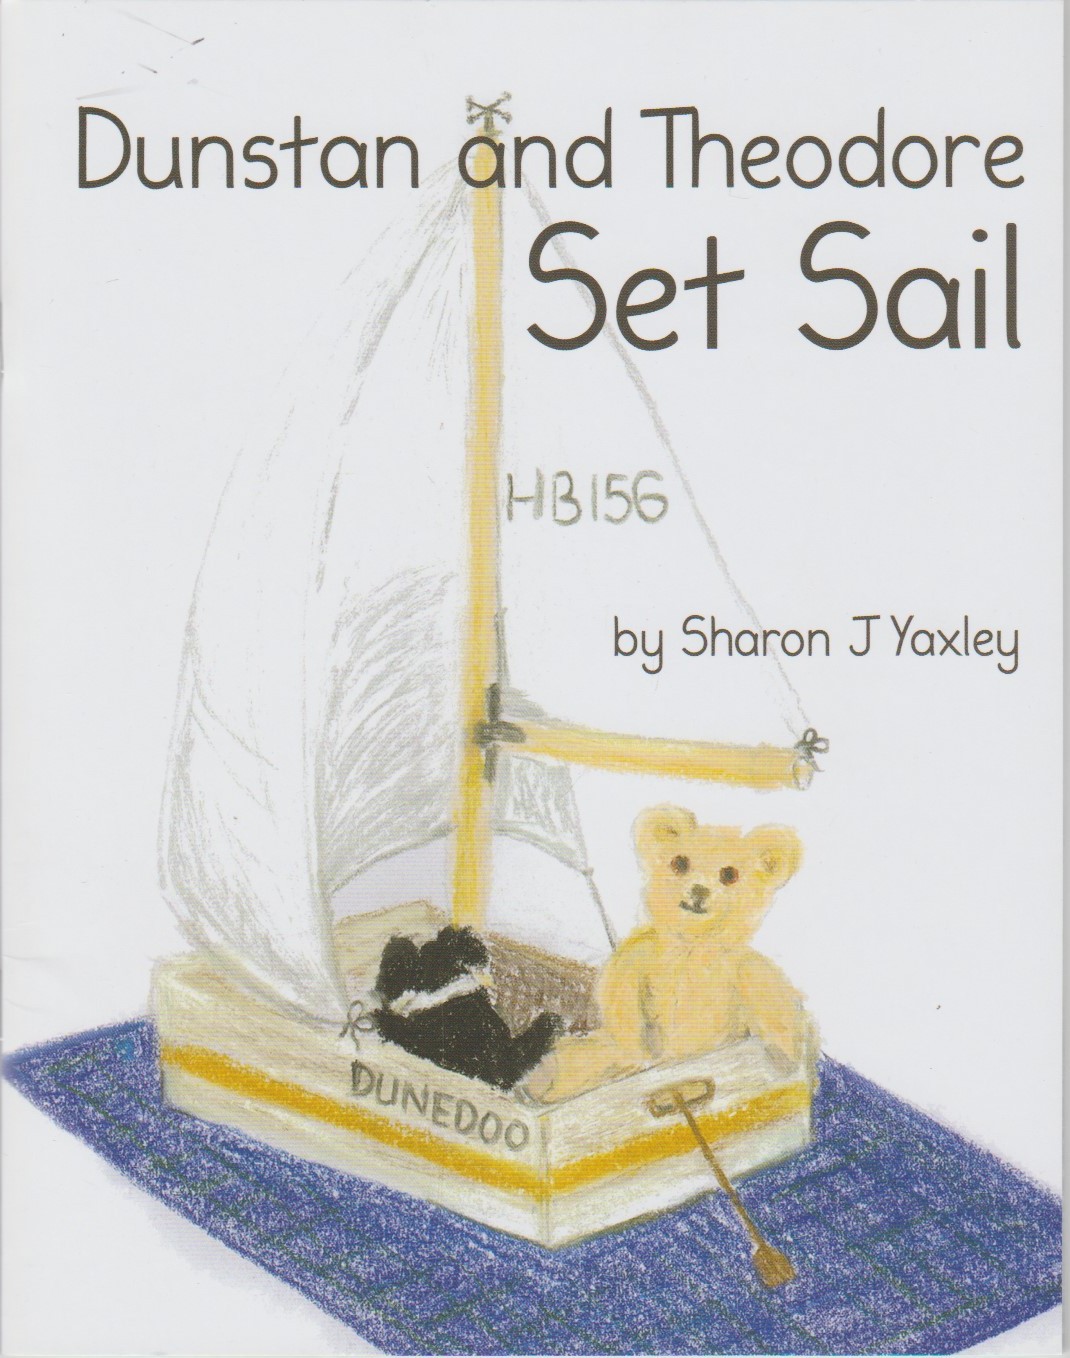 Dunstan and Theodore Set Sail - a children's story